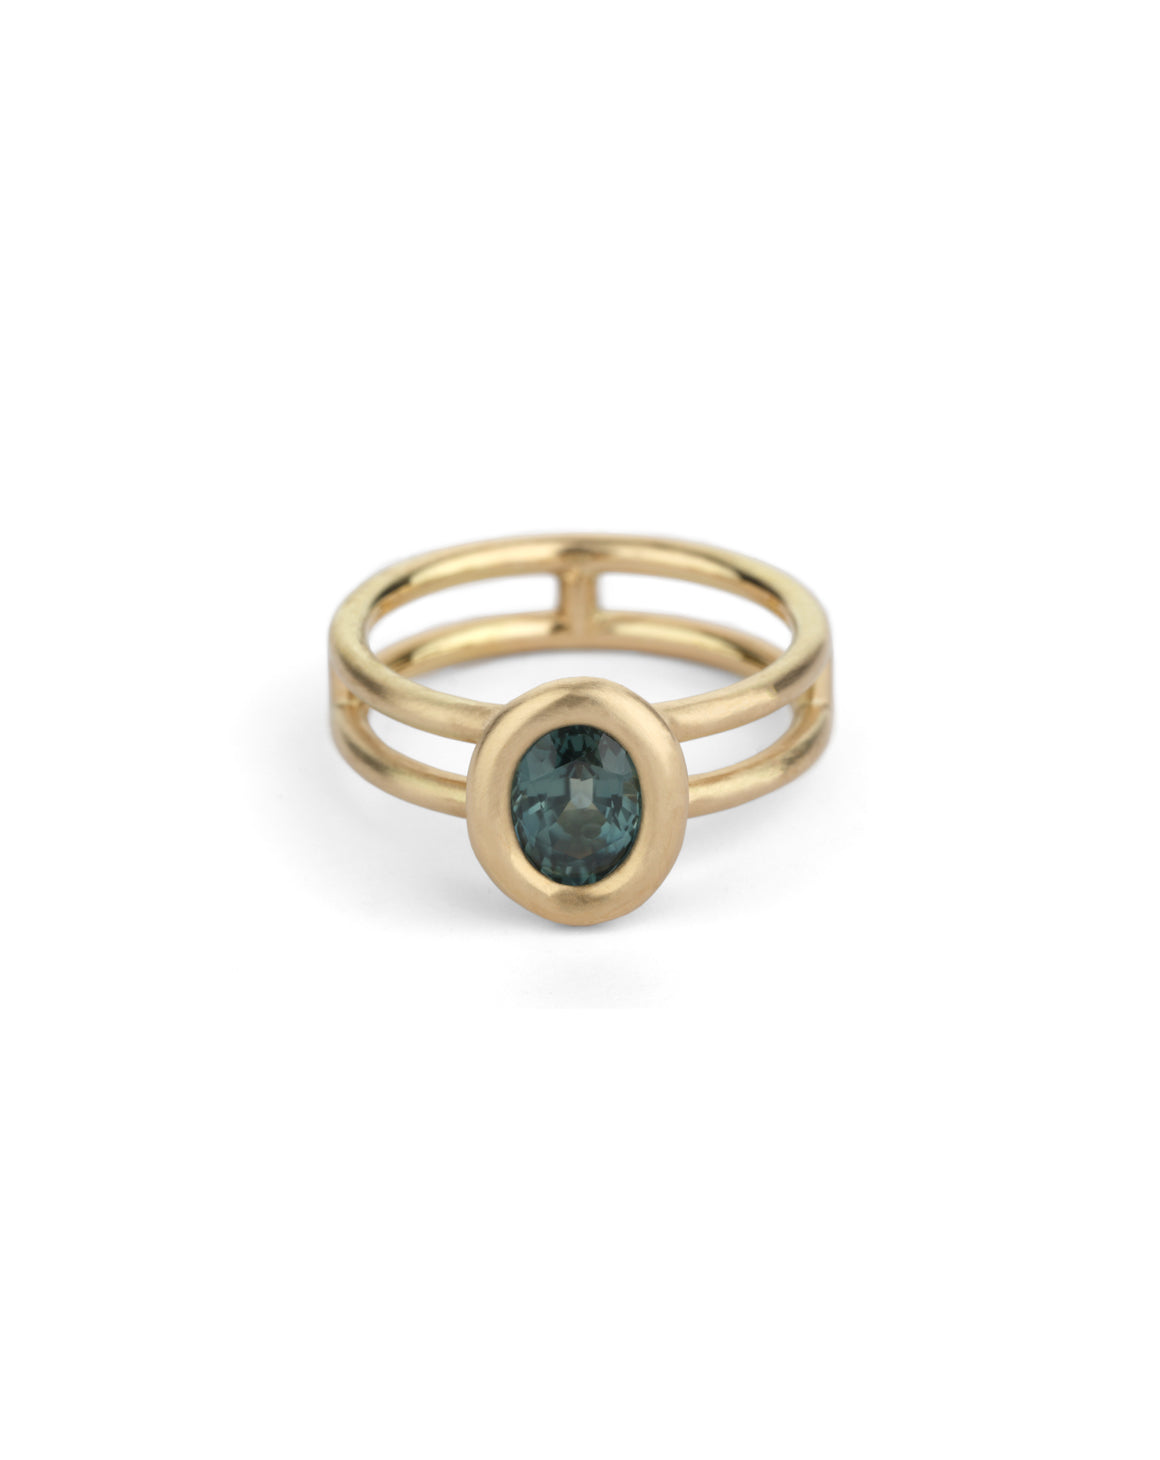 Teal Sapphire Densissima Oval Engagement Ring